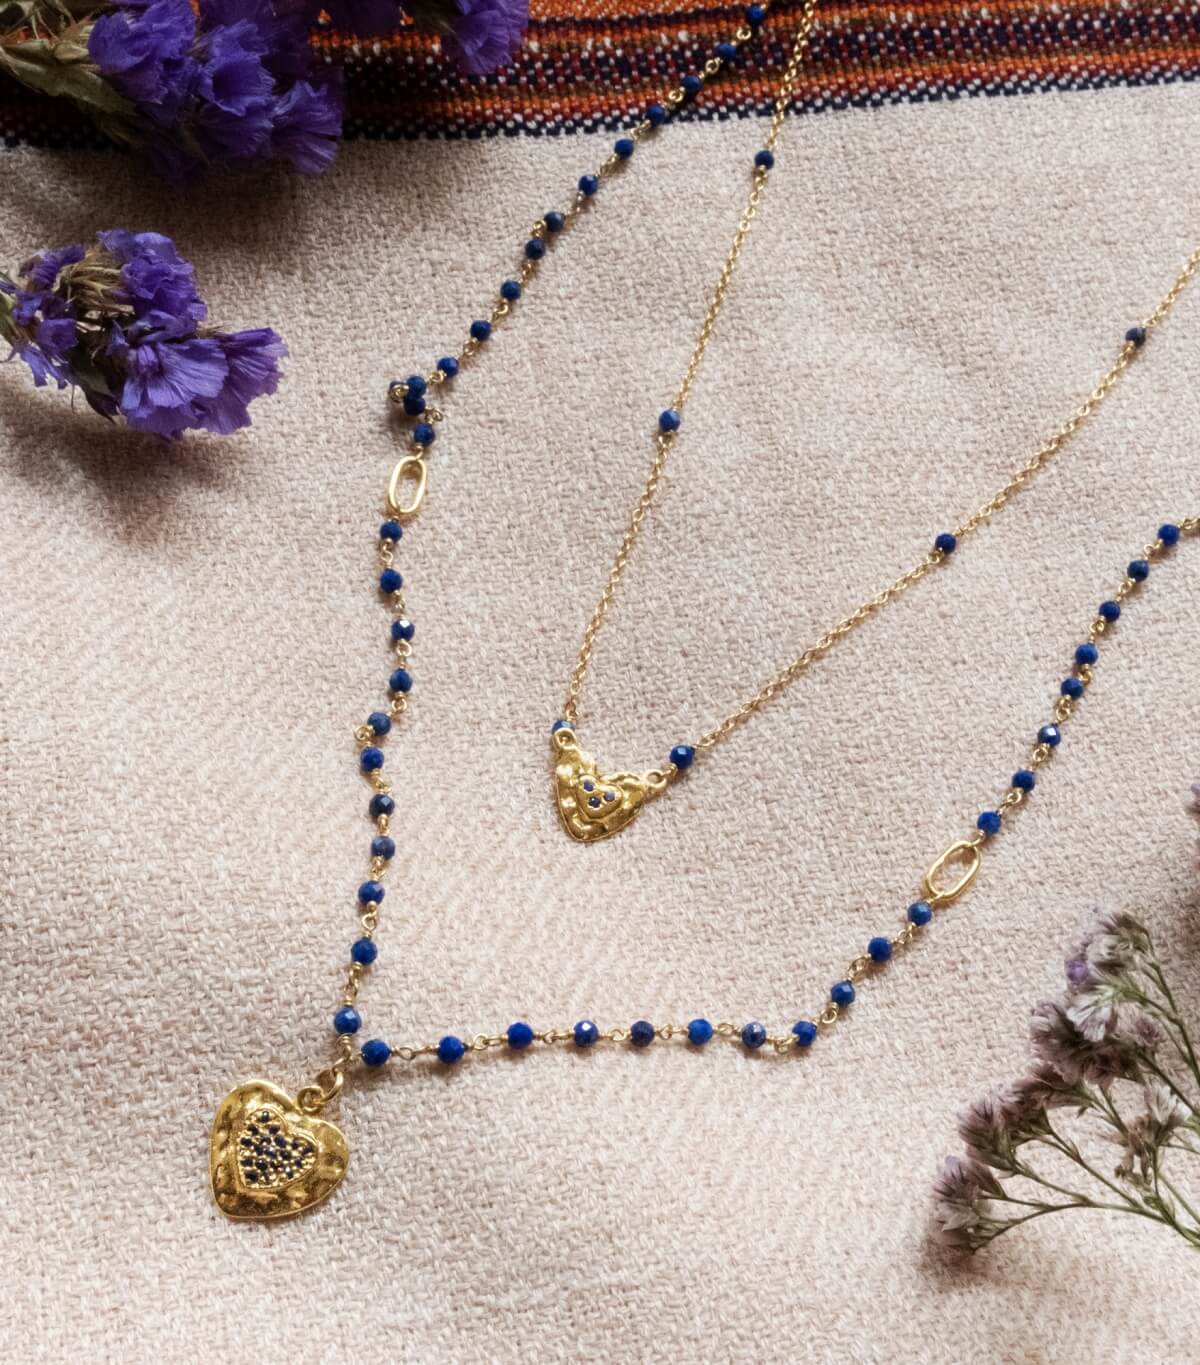 Necklace with lapis lazuli and sapphire